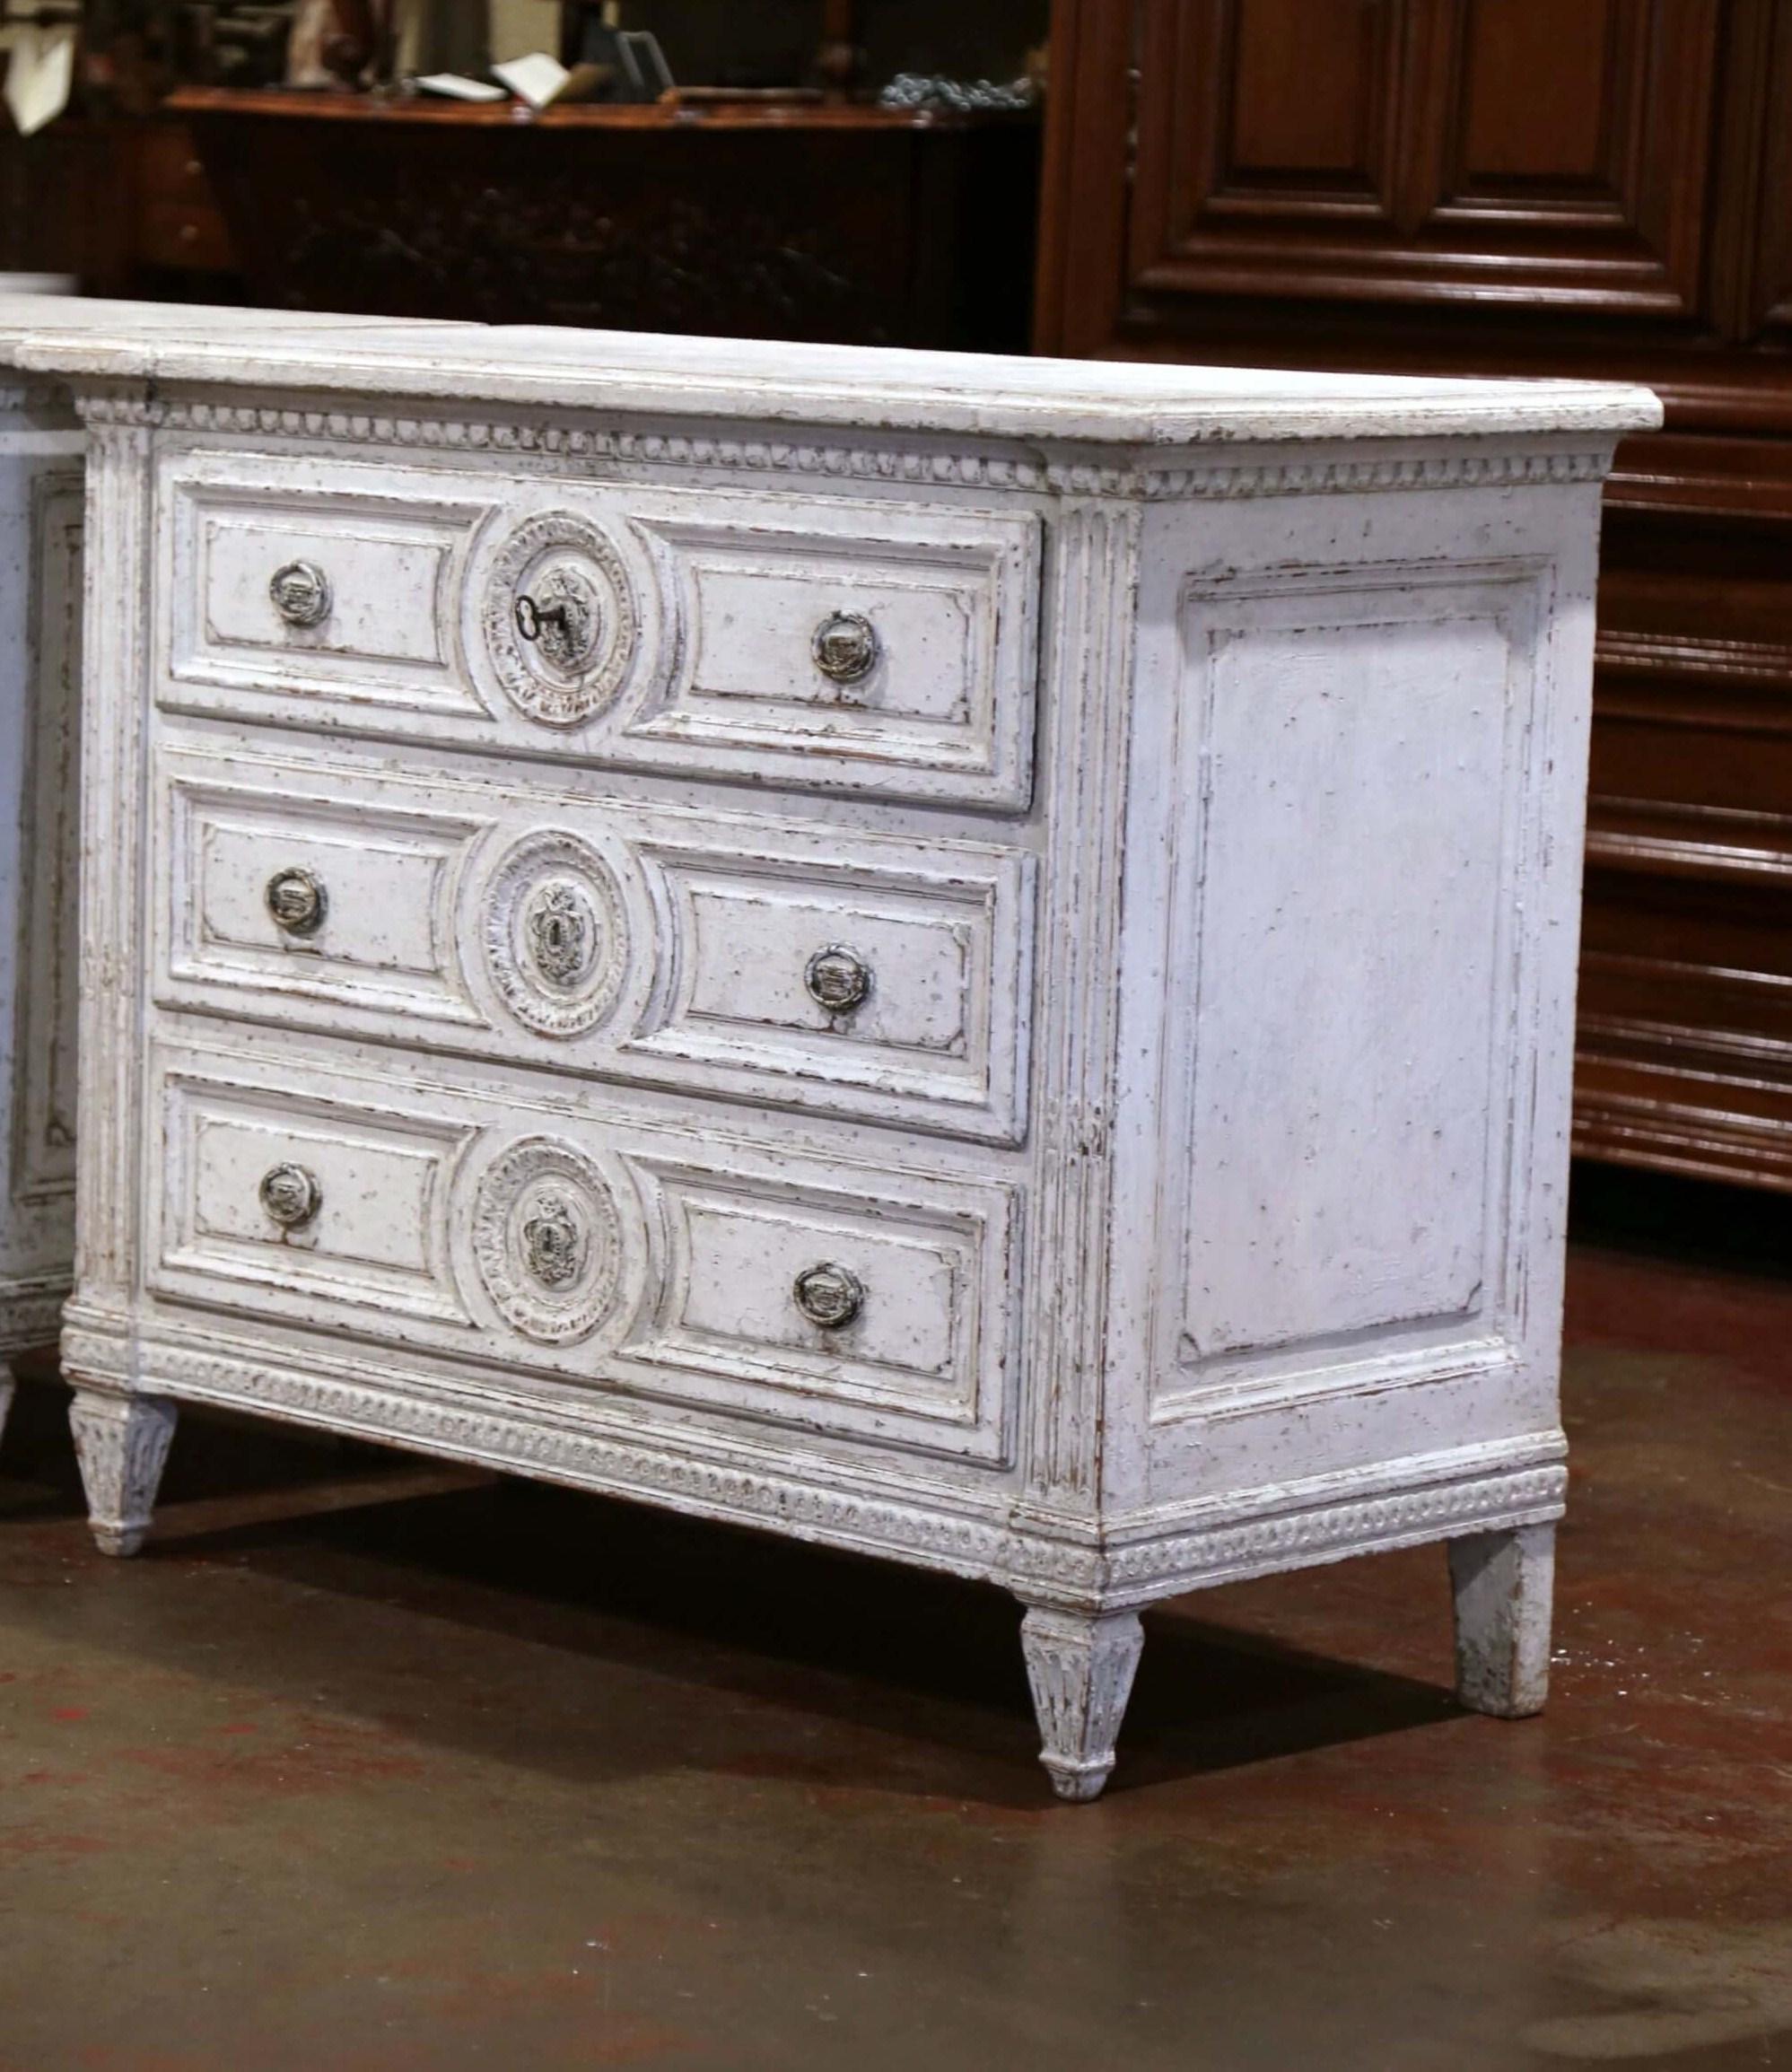 Use this elegant painted chest of drawers in an entry way or living room. Crafted in France, circa 1860, this cabinet sits on tapered and fluted feet, and features detailed carved decor including a round center medallion on each drawer, and spline